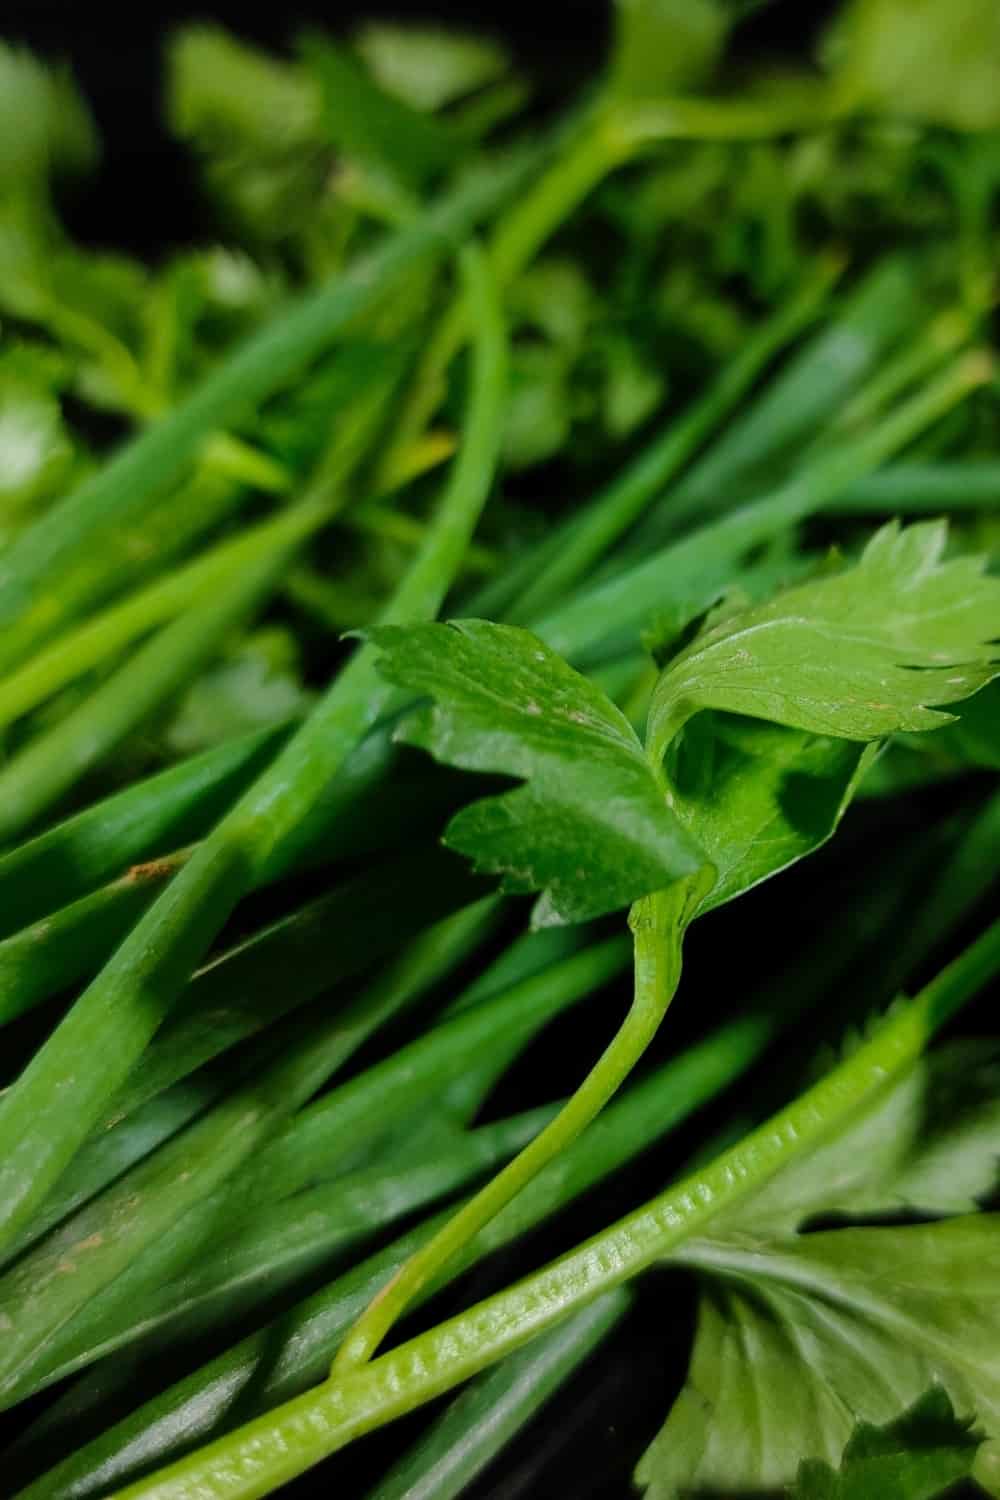 Chinese celery or Nan Ling celery